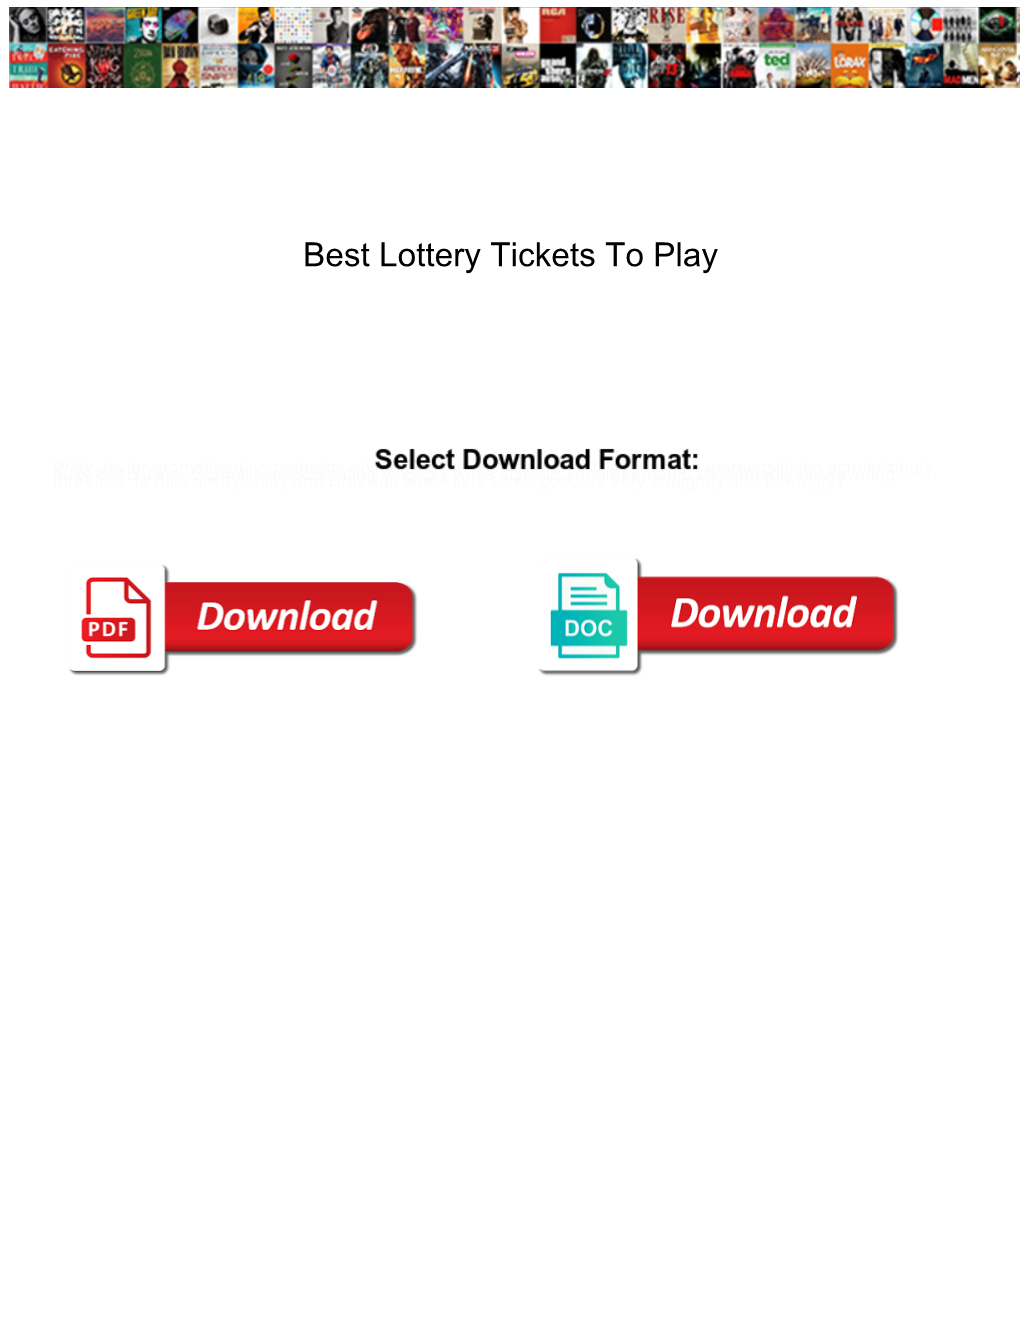 Best Lottery Tickets to Play